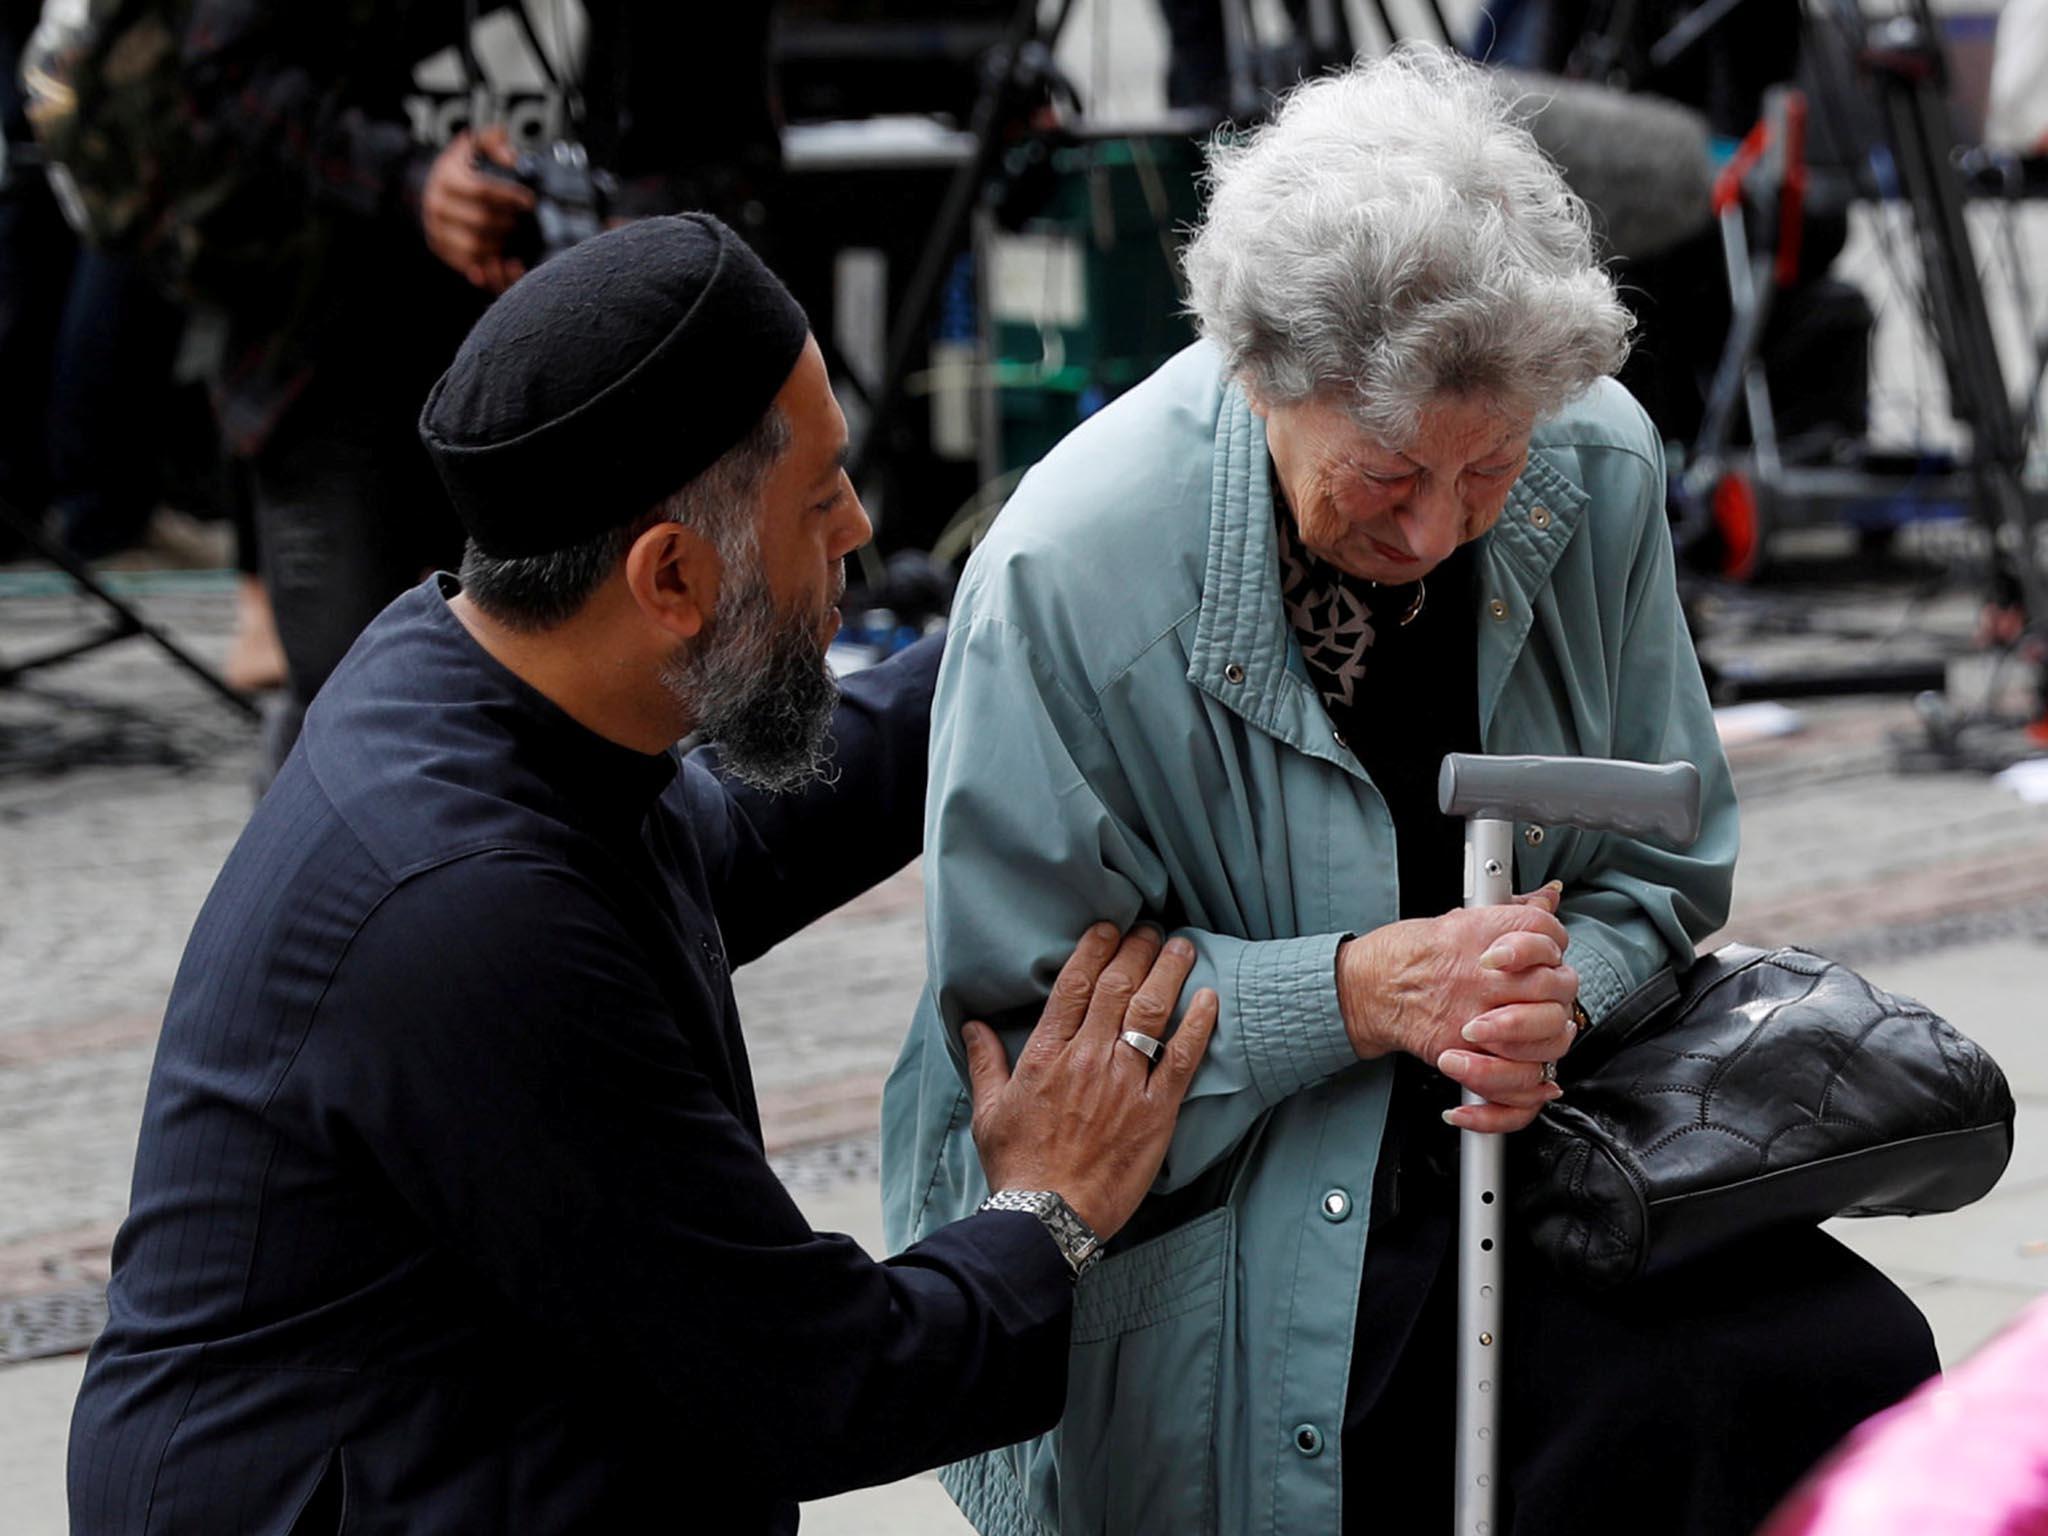 Thumbnail for Muslim man comforts elderly Jewish woman in symbol of Manchester's unity